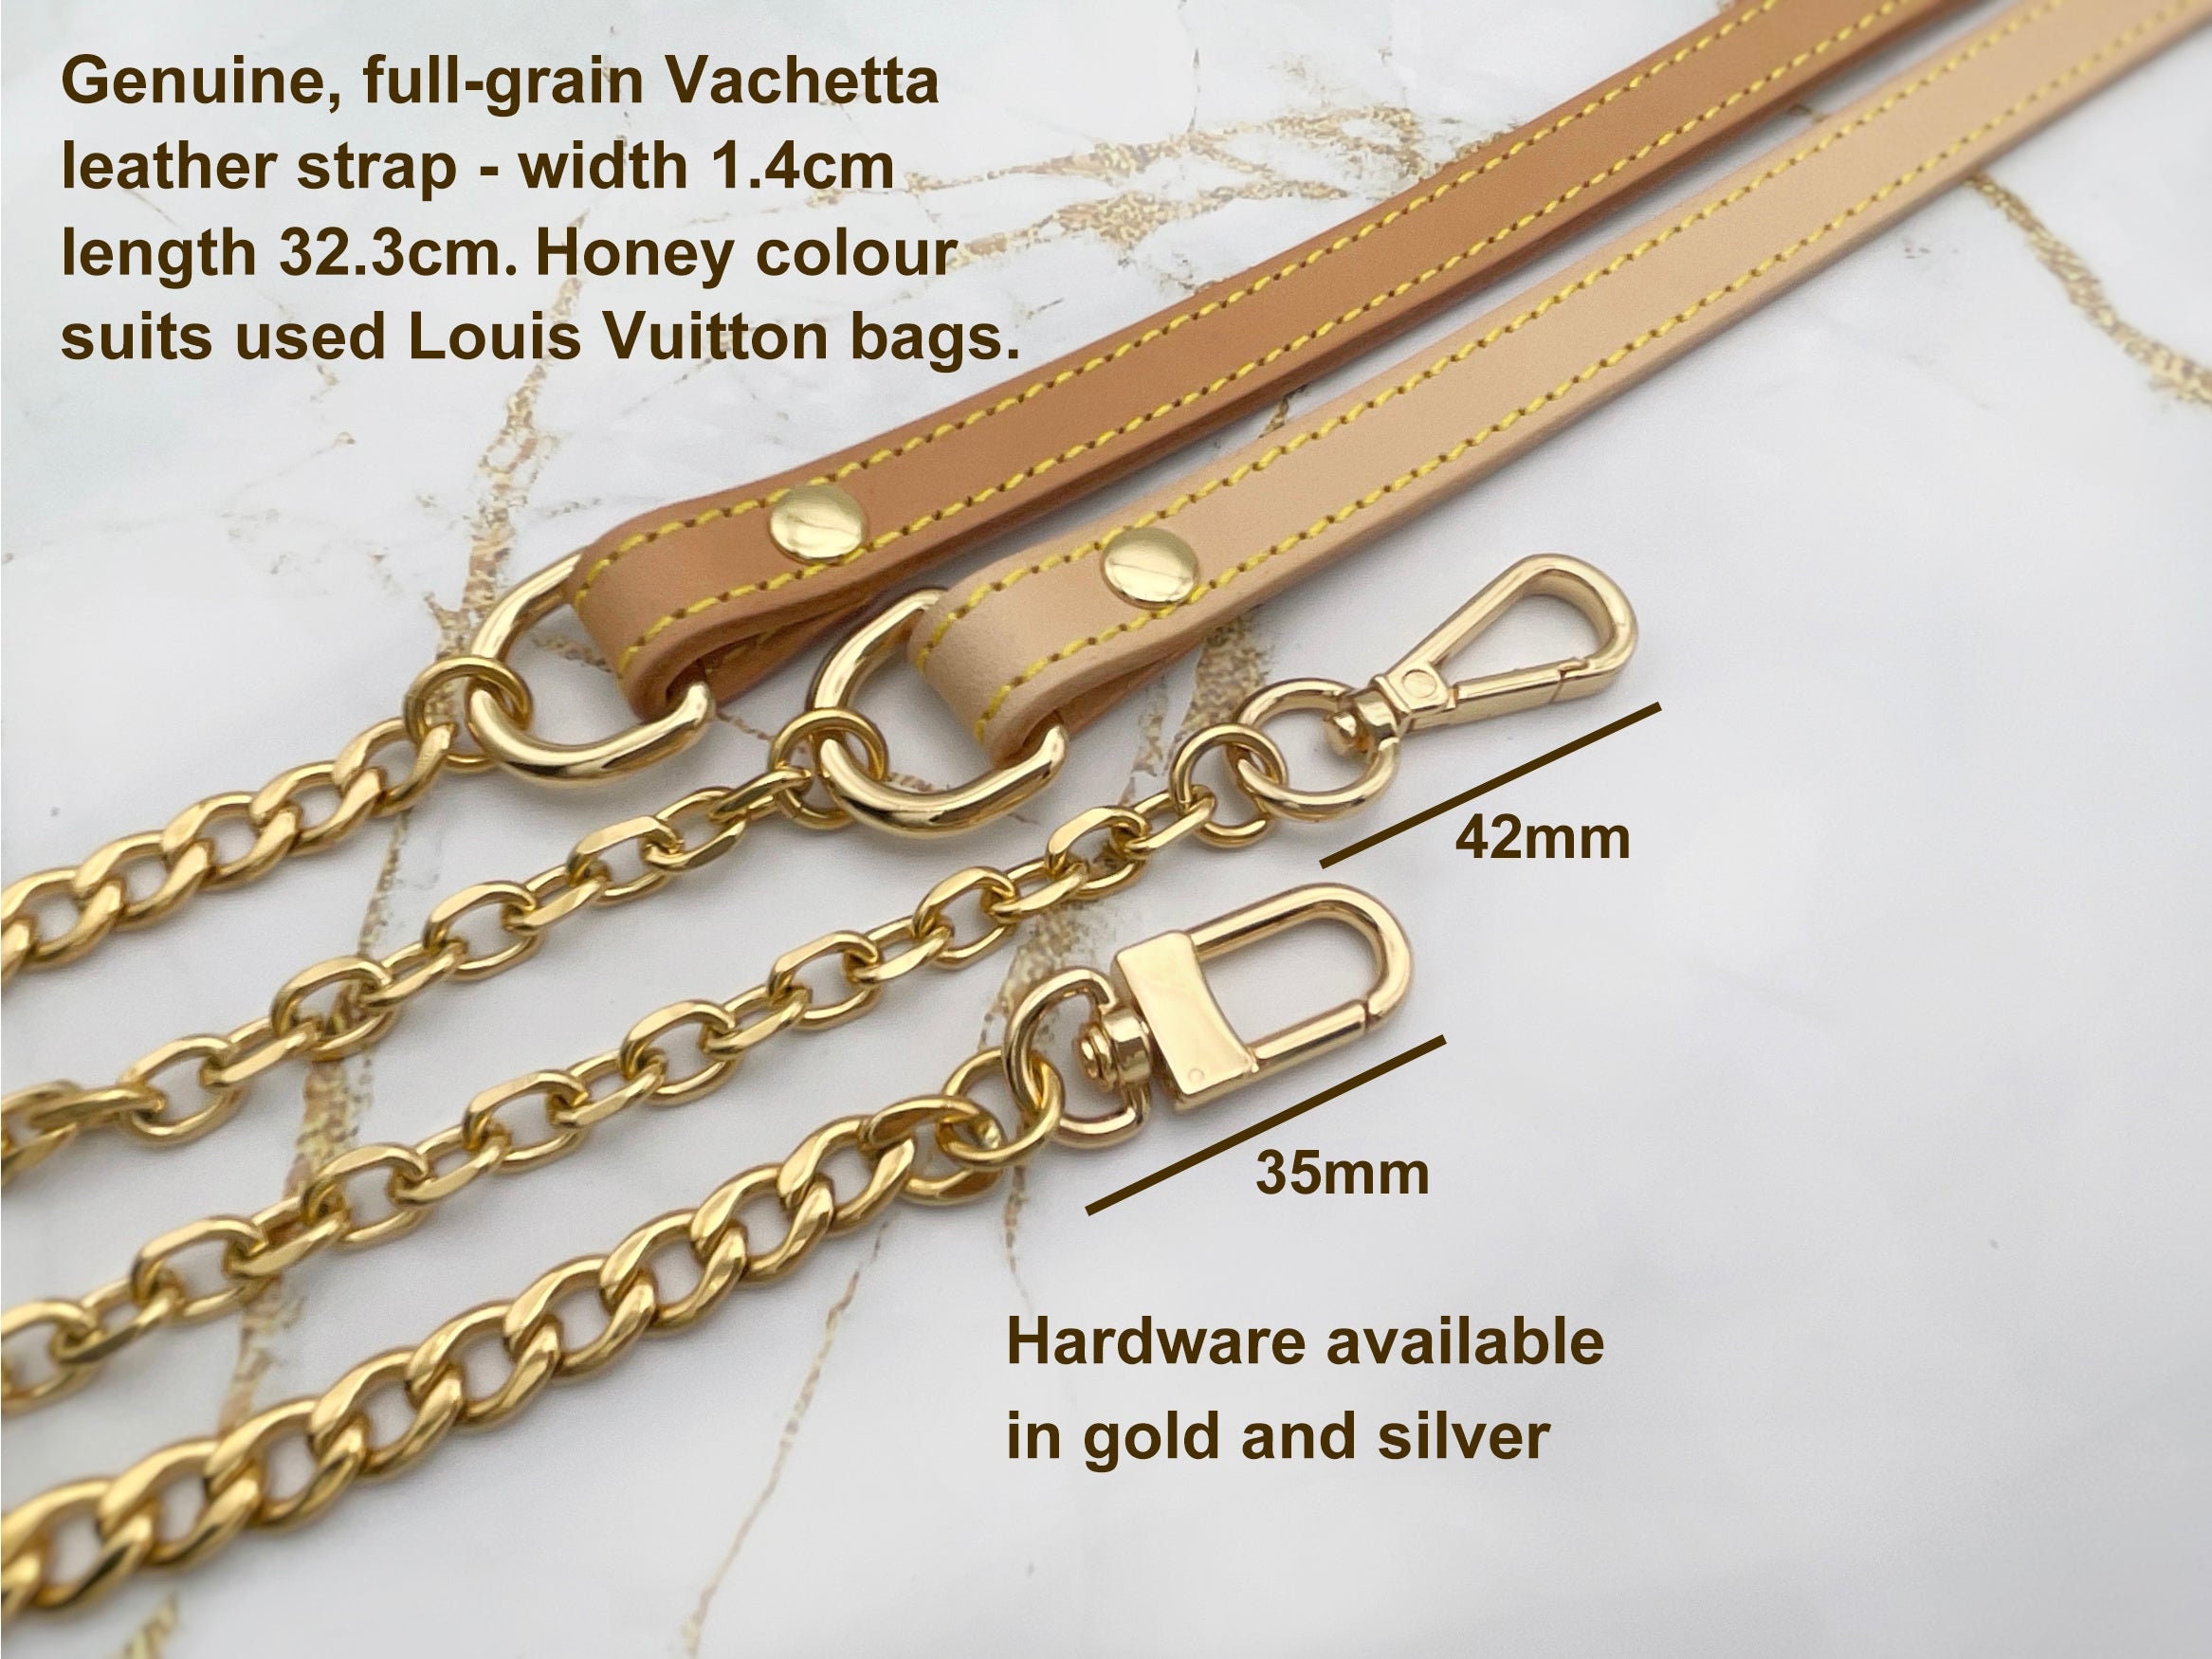 LSLeatherStudio Genuine Leather Chain Strap, High-Quality Leather Strap with Chain for Bags, Shoulder Wallet Chain Purse Strap, Crossbody Strap